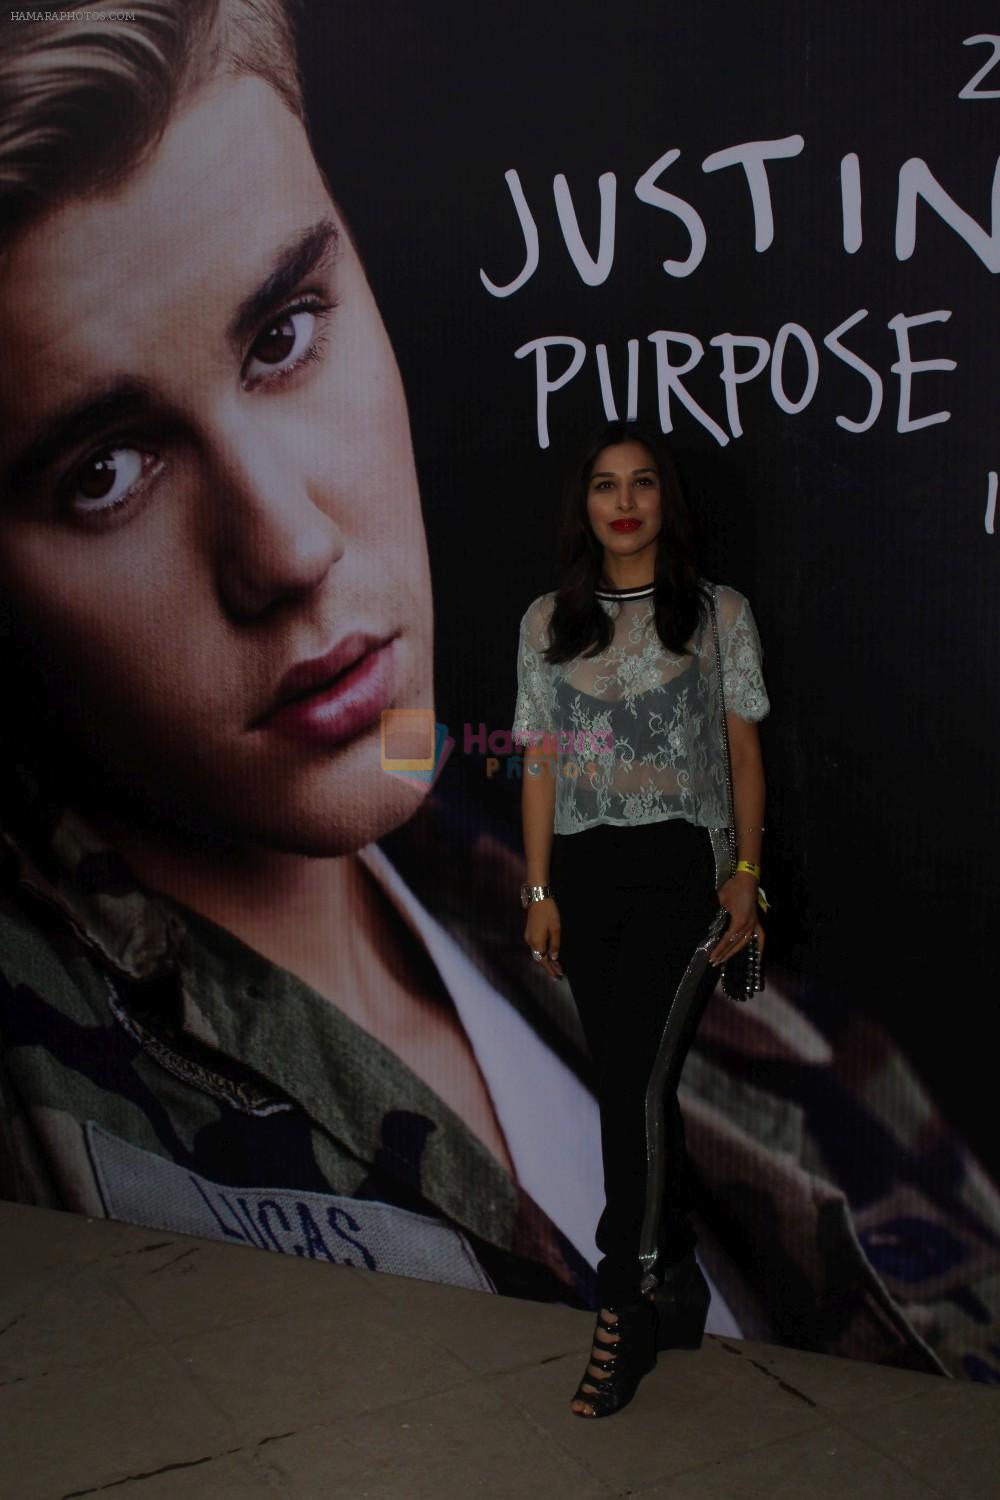 Sophie Chaudhary at Justin Bieber Purpose World Tour Concert on 10th May 2017